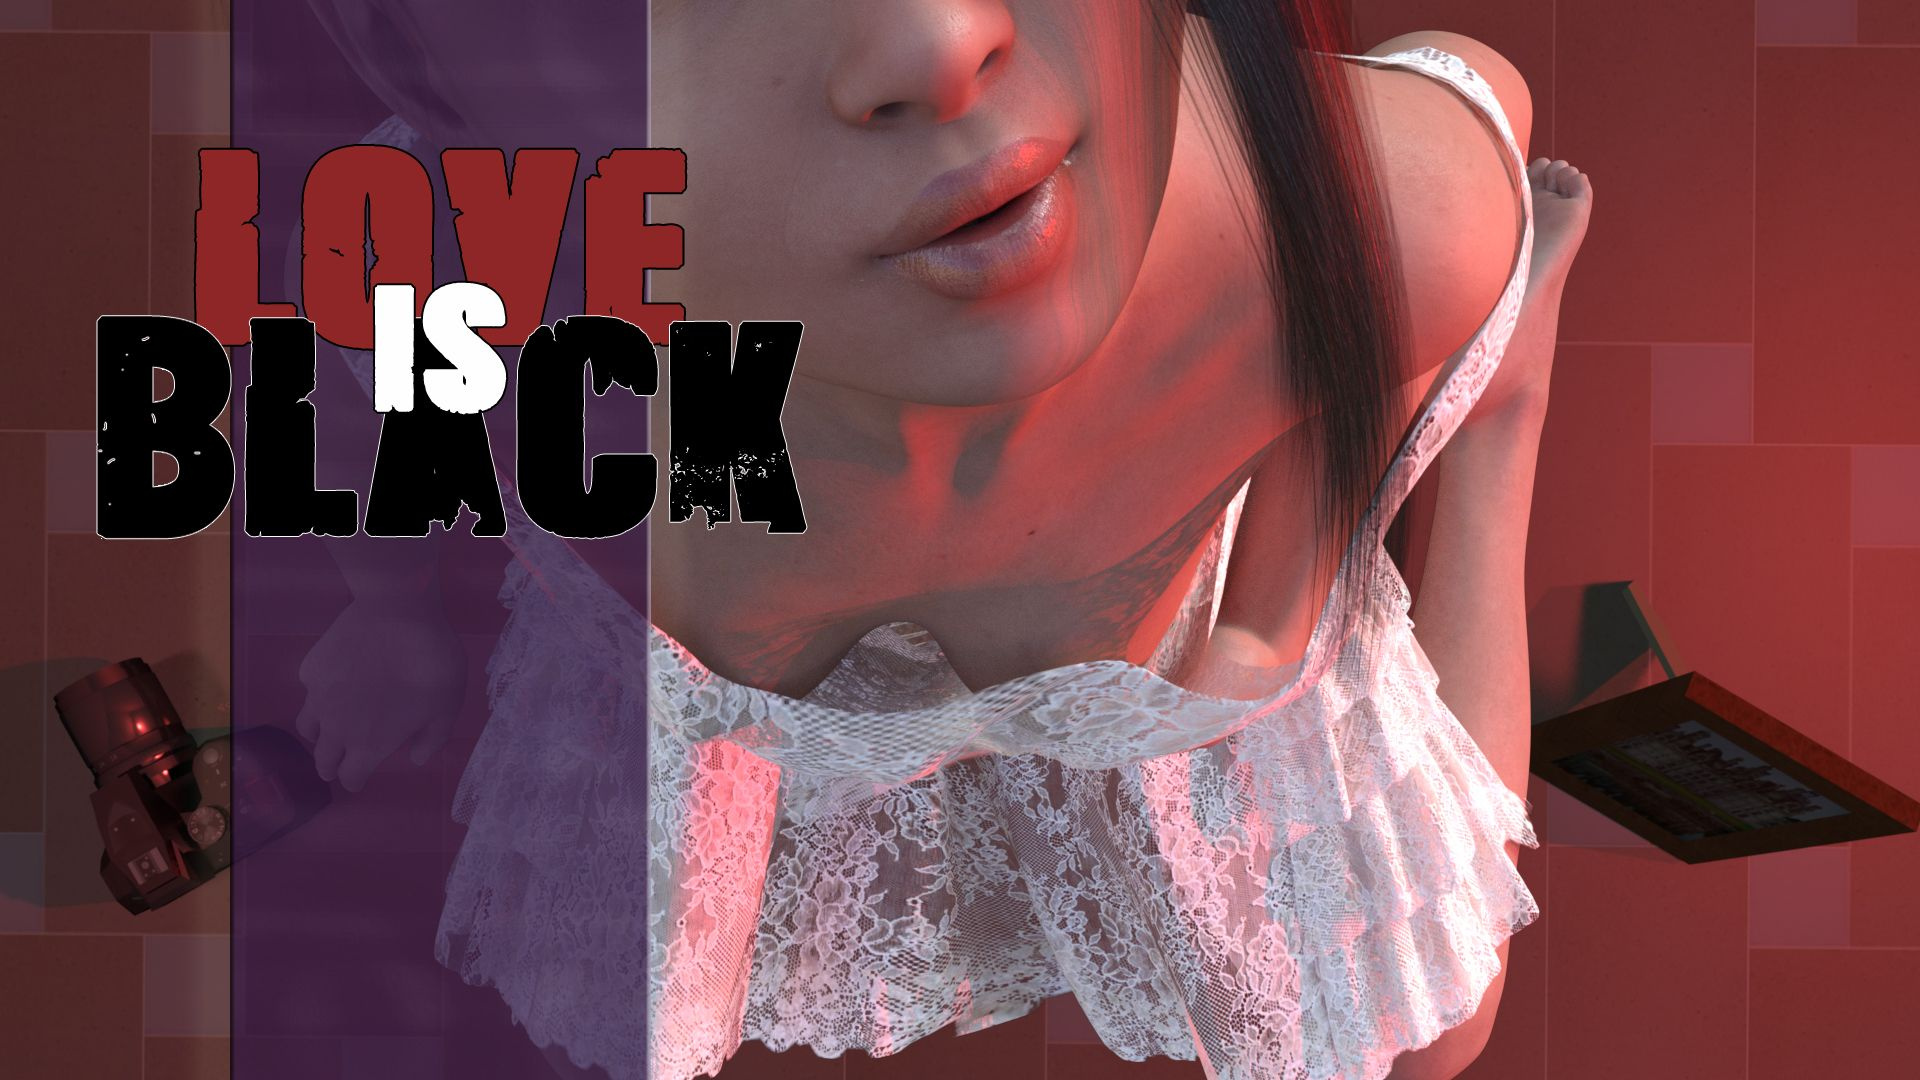 LisB - Love is Black v0.5.4.5 (Win/Android/Mac)